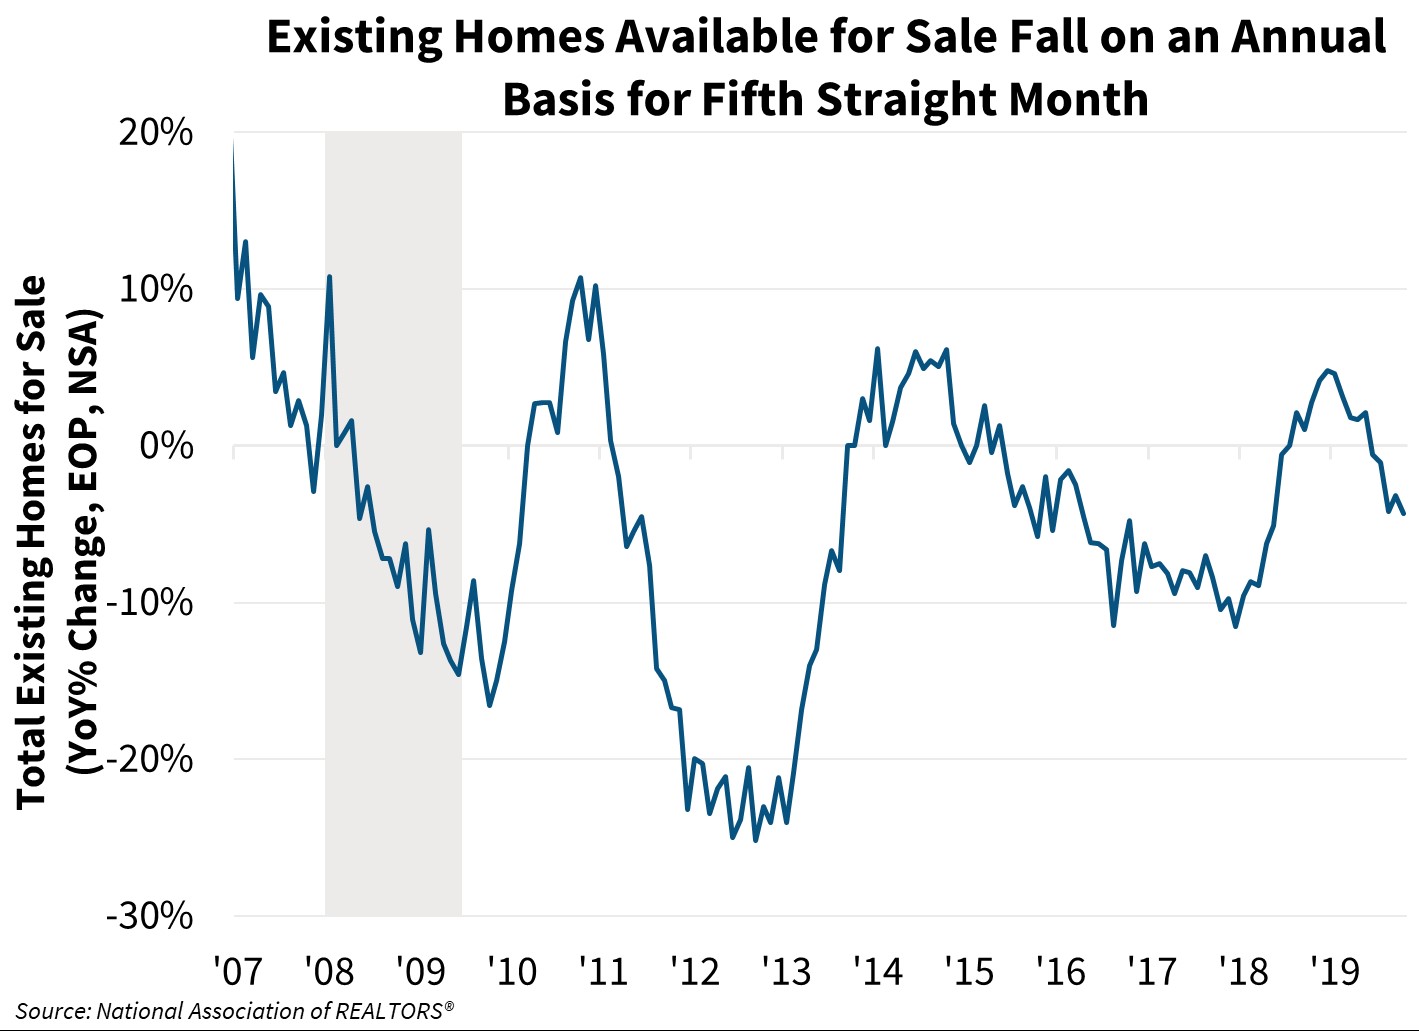 Existing Homes Available for Sale Fall on an Annual Basis for Fifth Straight Month